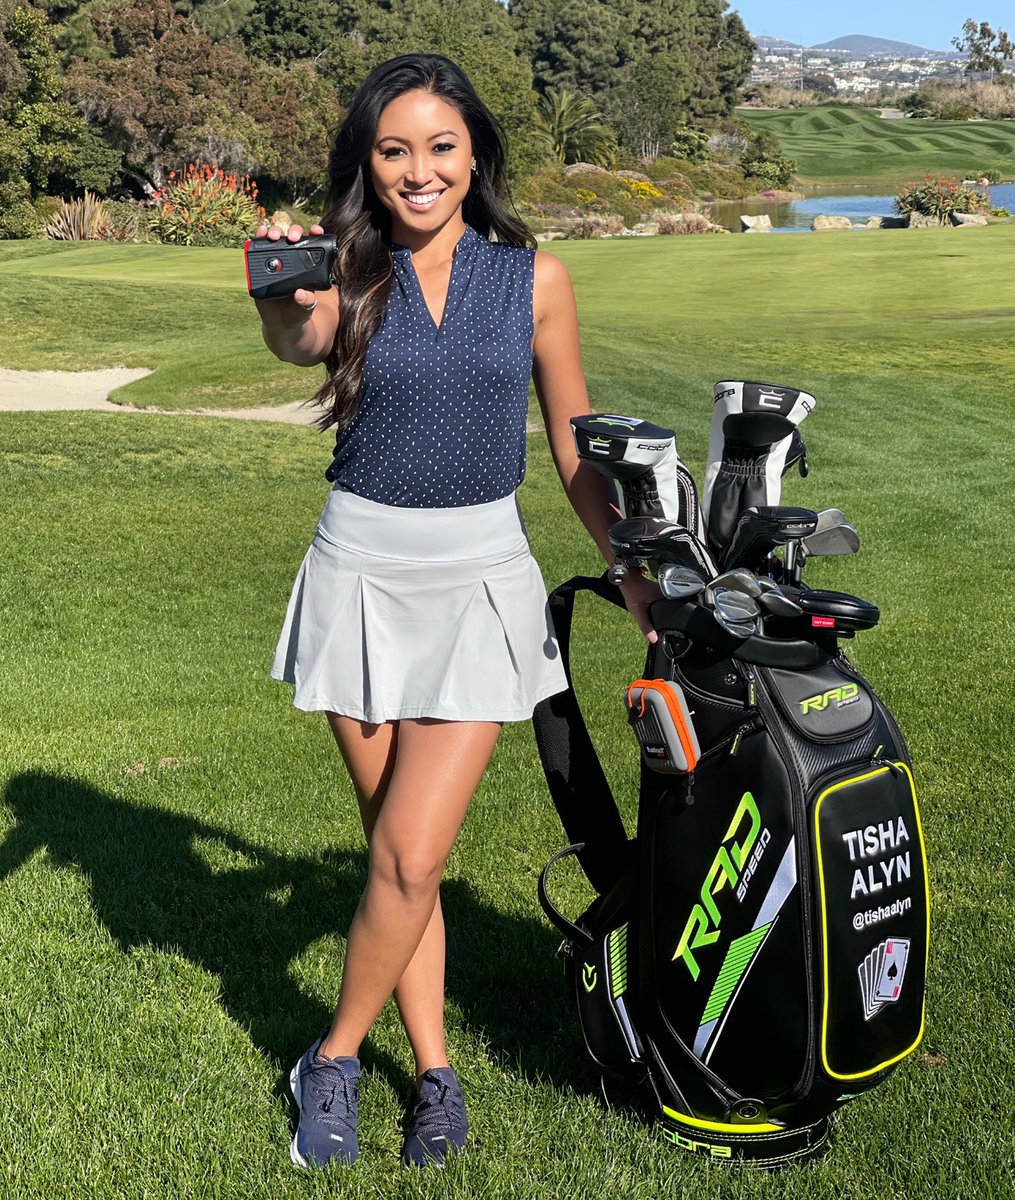 Love my new @BushnellGolf tour V5 Shift Rangefinder! ⛳️ Head to my IG to enter into my giveaway where I’ll be choosing 3 winners to get this bad boy! 👊🏽 #teambushnell